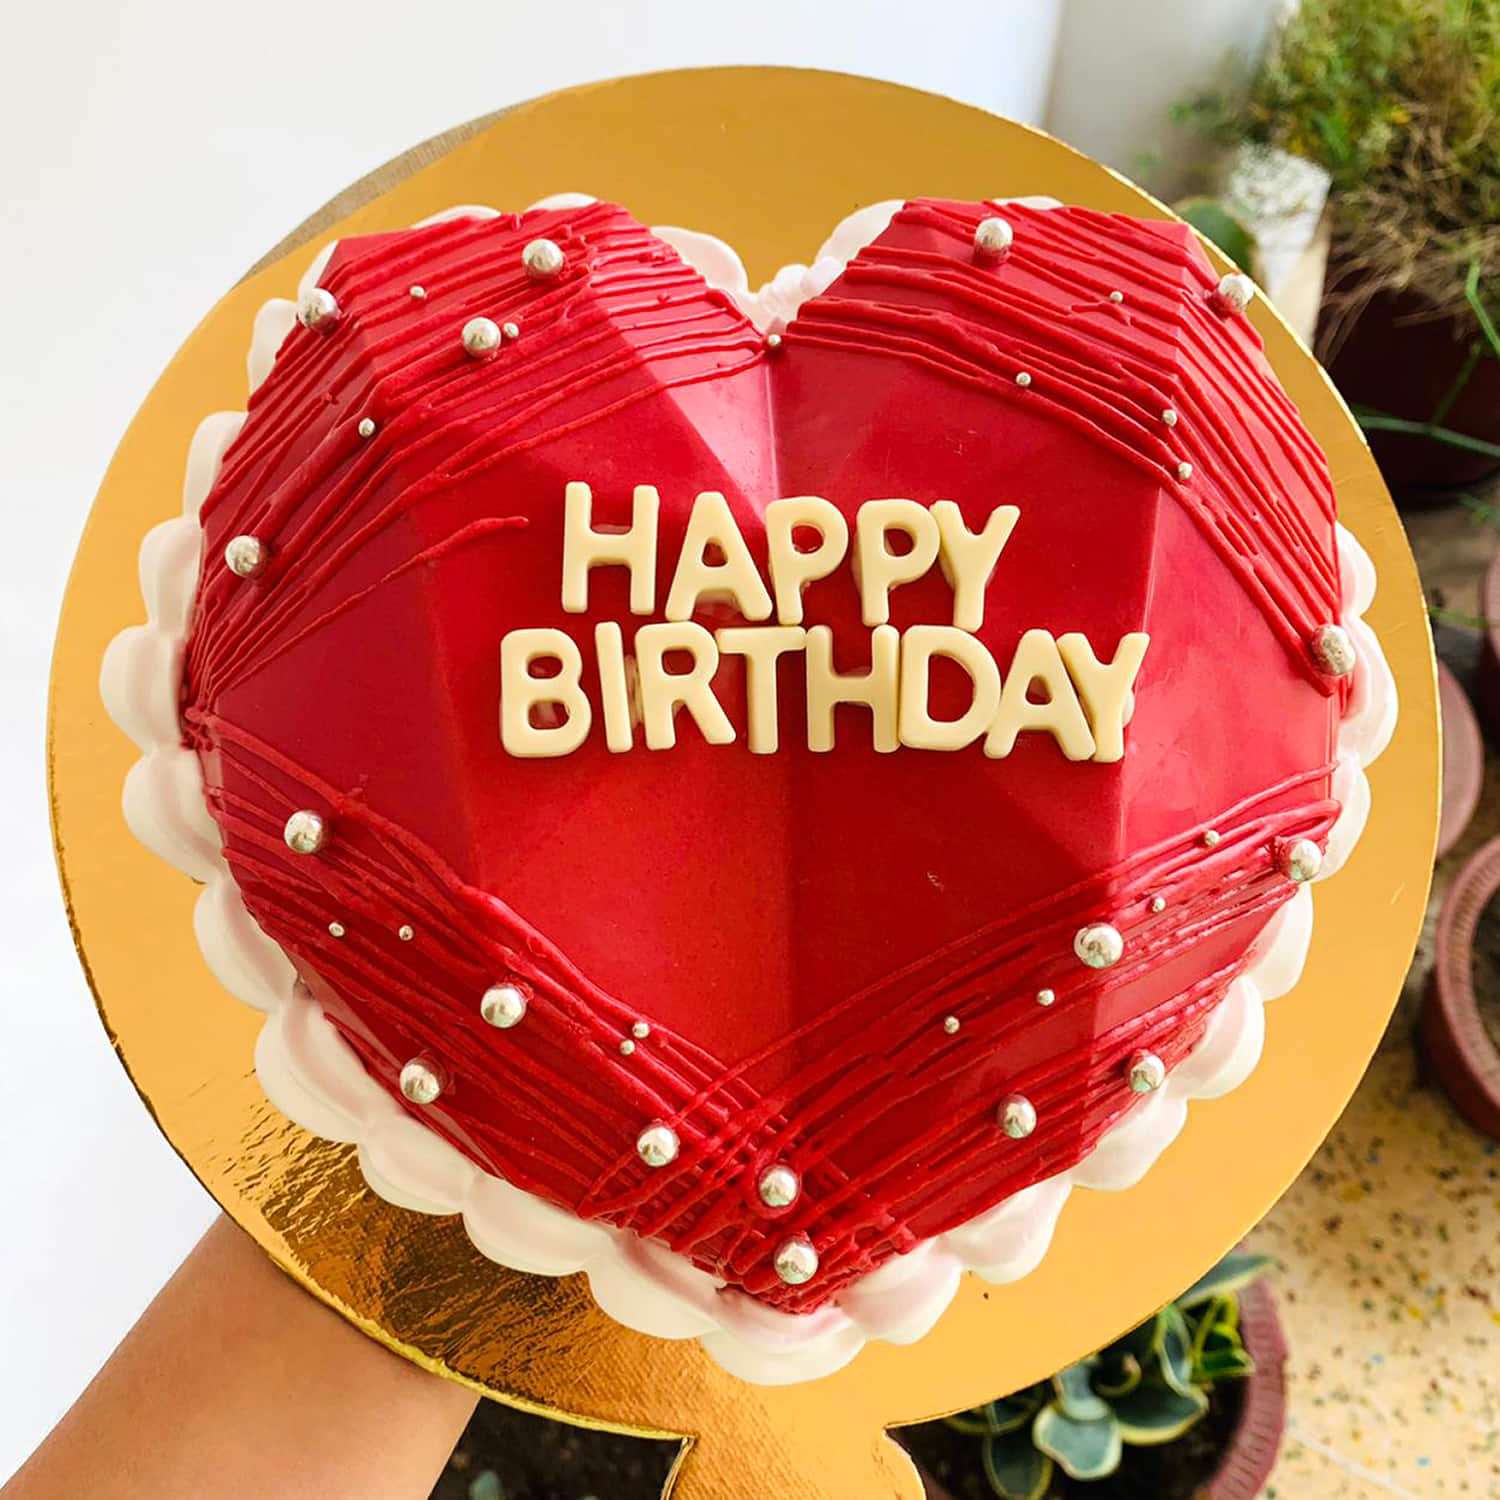 Online Red Velvet Cakes delivery in 3 hours | Order Red Velvet Cakes online  | Same day